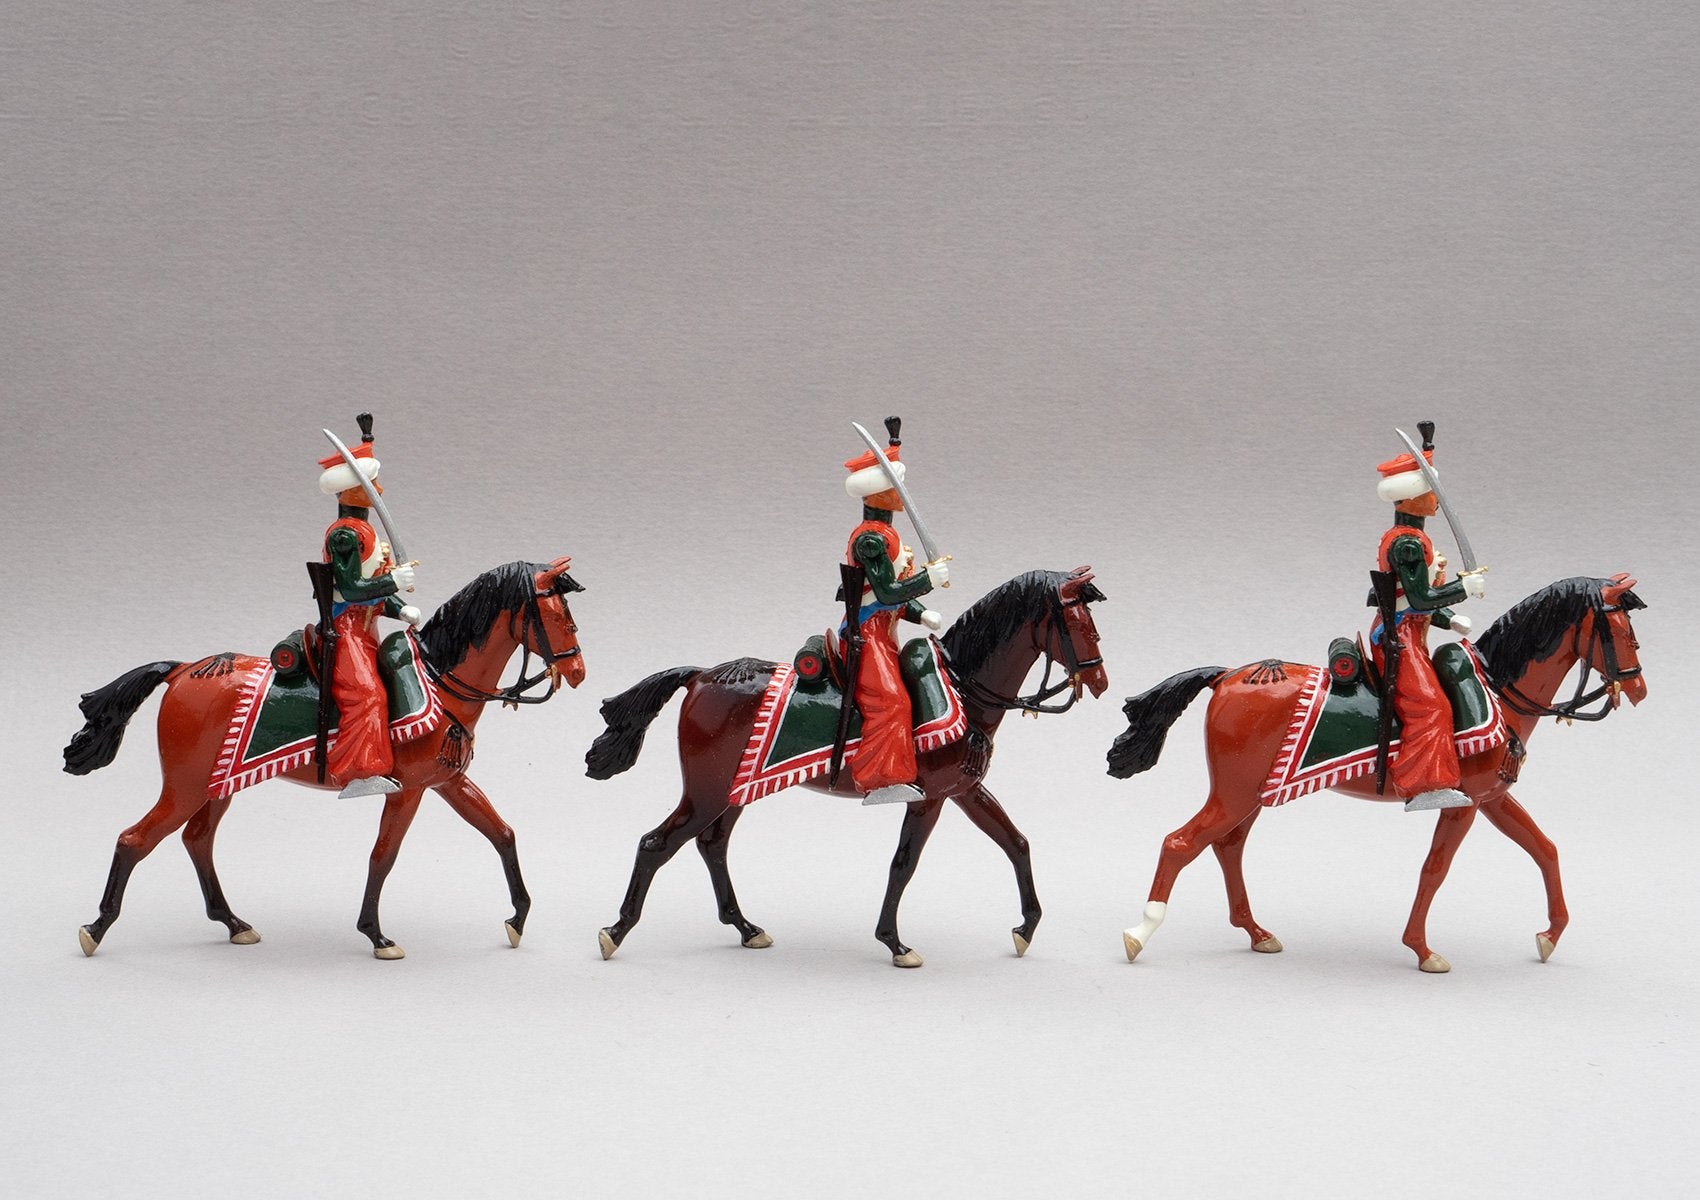 Set 117 Marmelukes | French Cavalry | Napoleonic Wars | Three mounted cavalry figures. Their uniform is of Syrian and Turkish Mameluke pattern; turban, sleeved chemise, arab sash, charoual-style trousers, and Mameluke sabre | Waterloo | © Imperial Productions | Sculpt by David Cowe